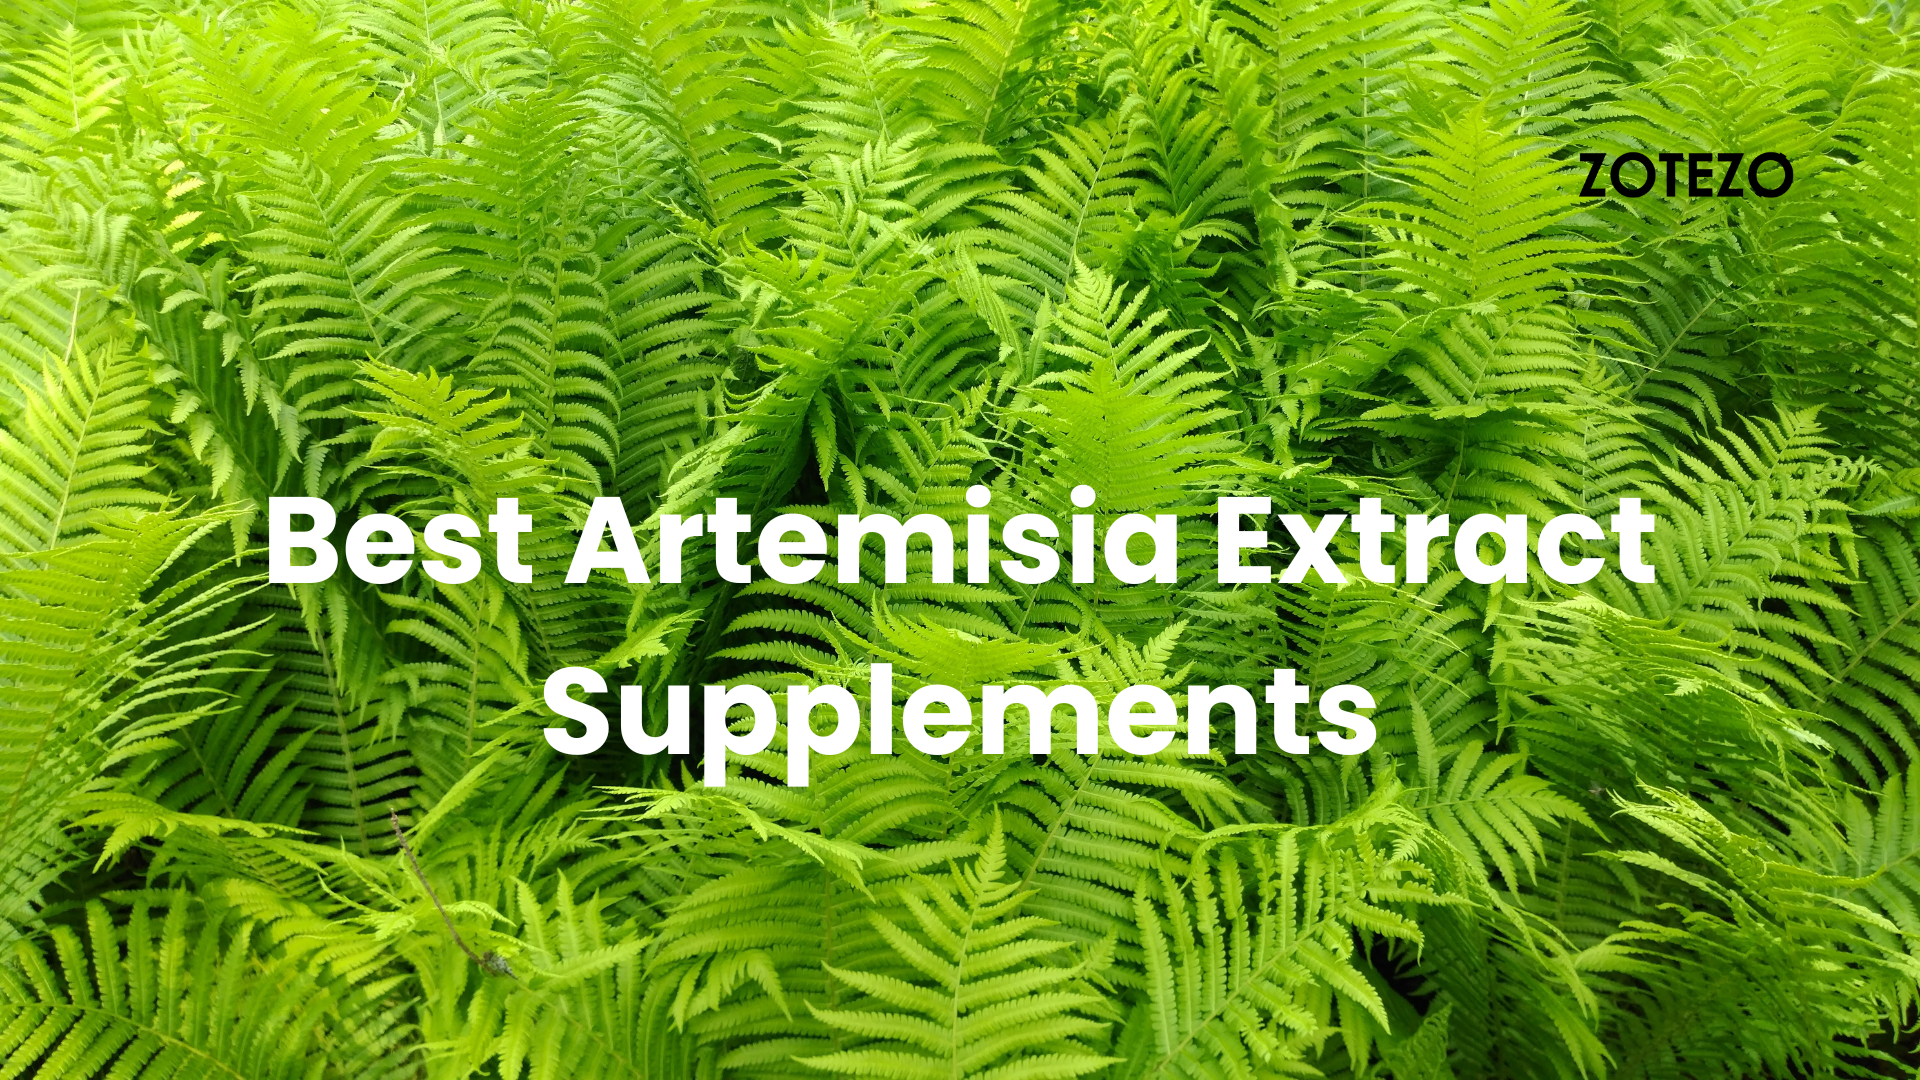 Artemisia Extract Supplements in the World